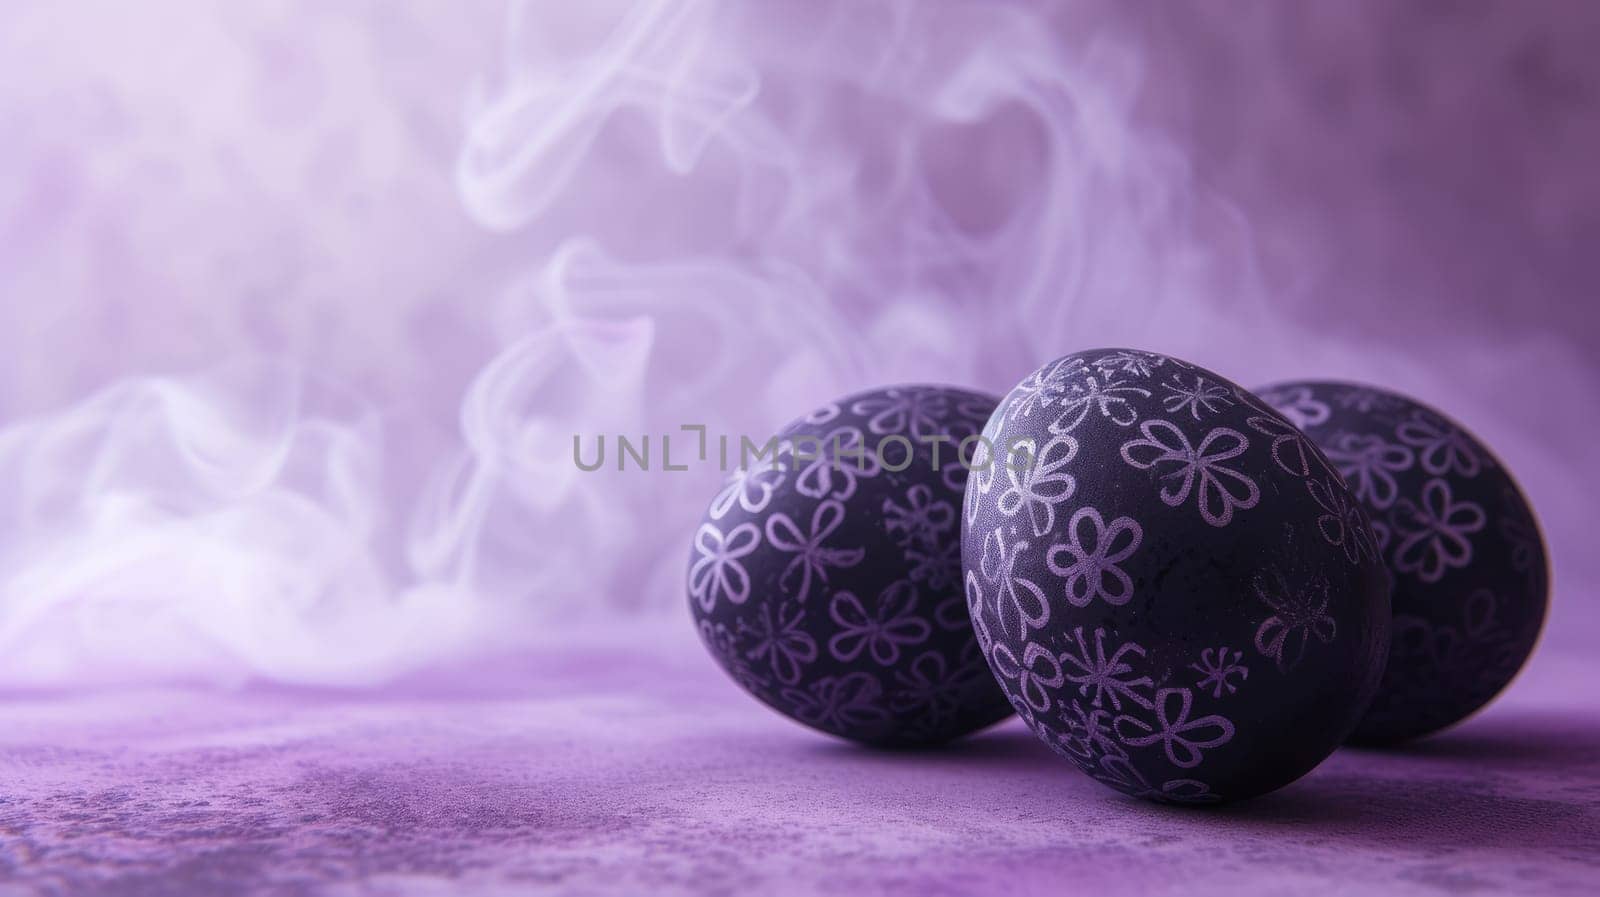 Purple and black Easter Eggs on dark Background. Happy Easter eggs by JuliaDorian